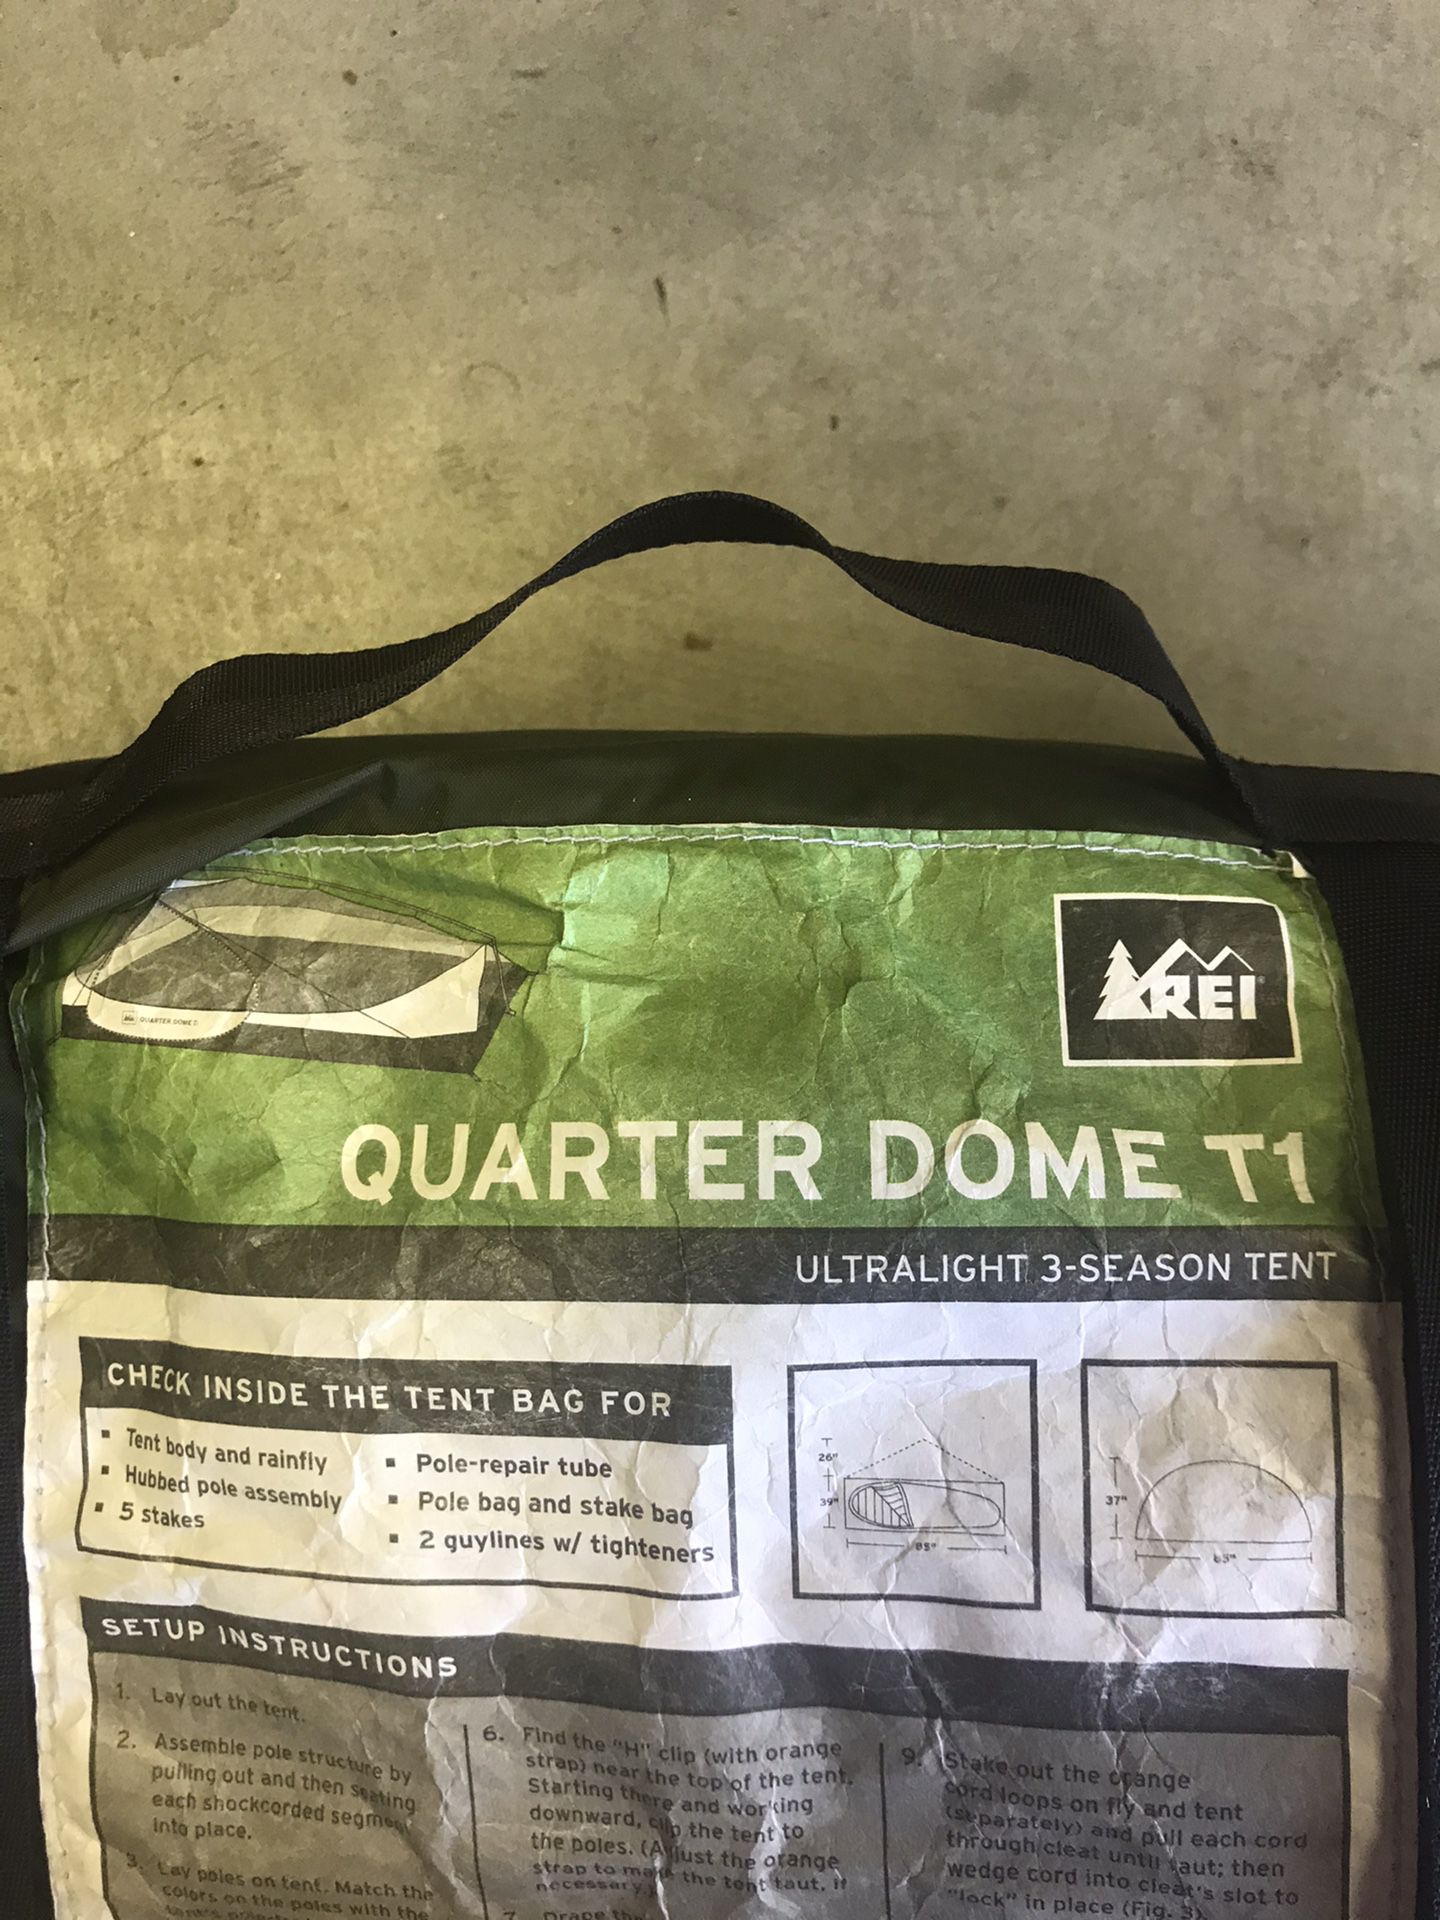 New Quarter dome T1 tent. Camping gear. Sleep shelter. Easy set up and take down